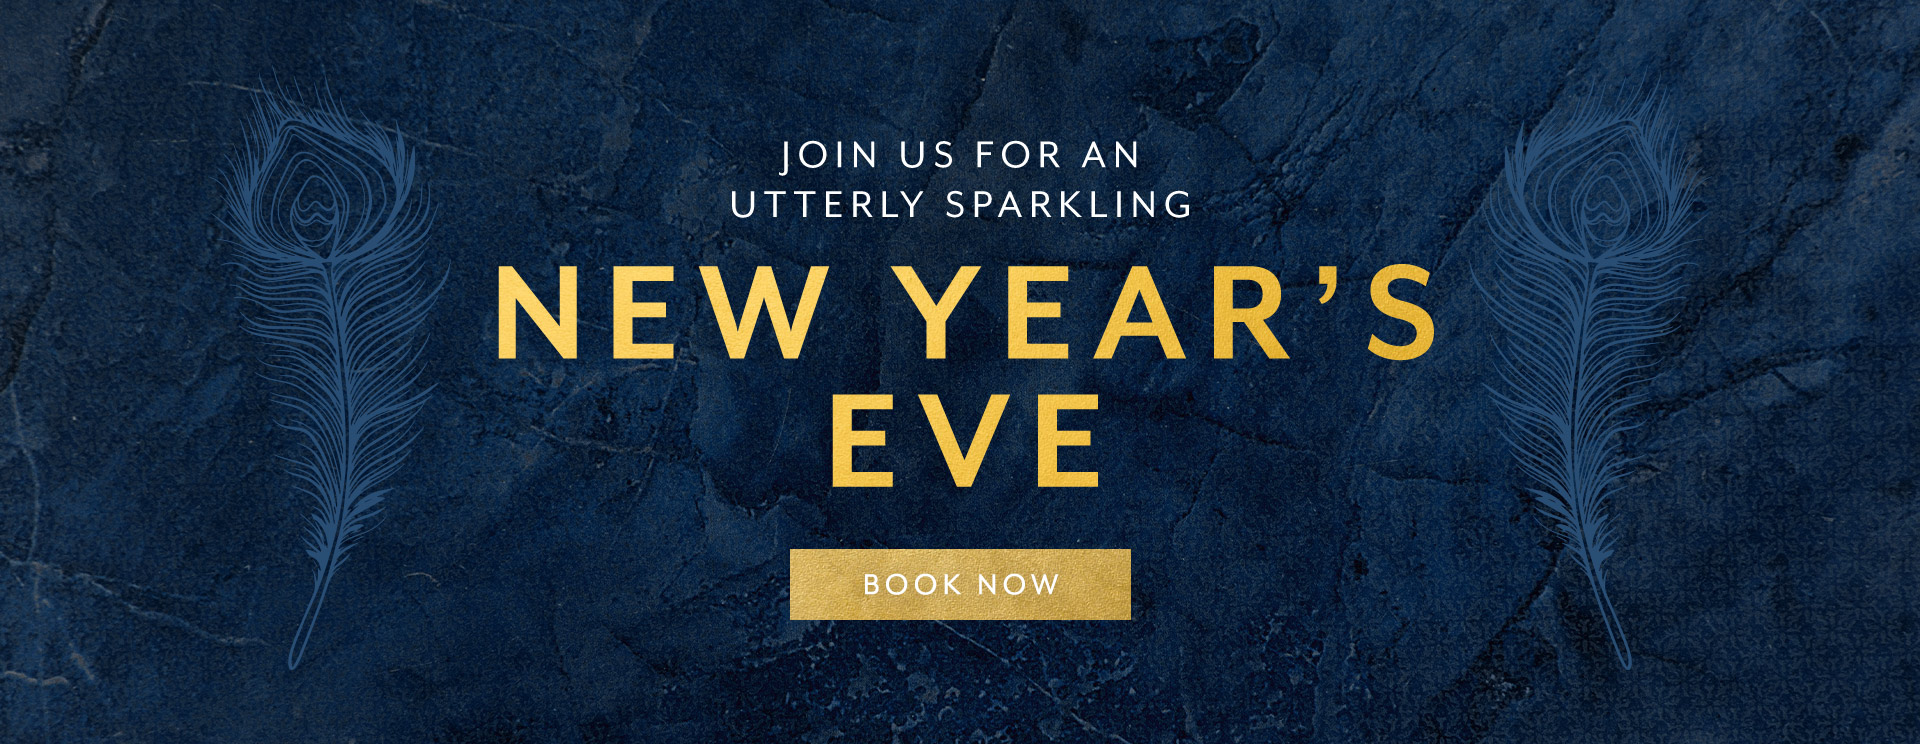 New Year's Eve at The Red Lion